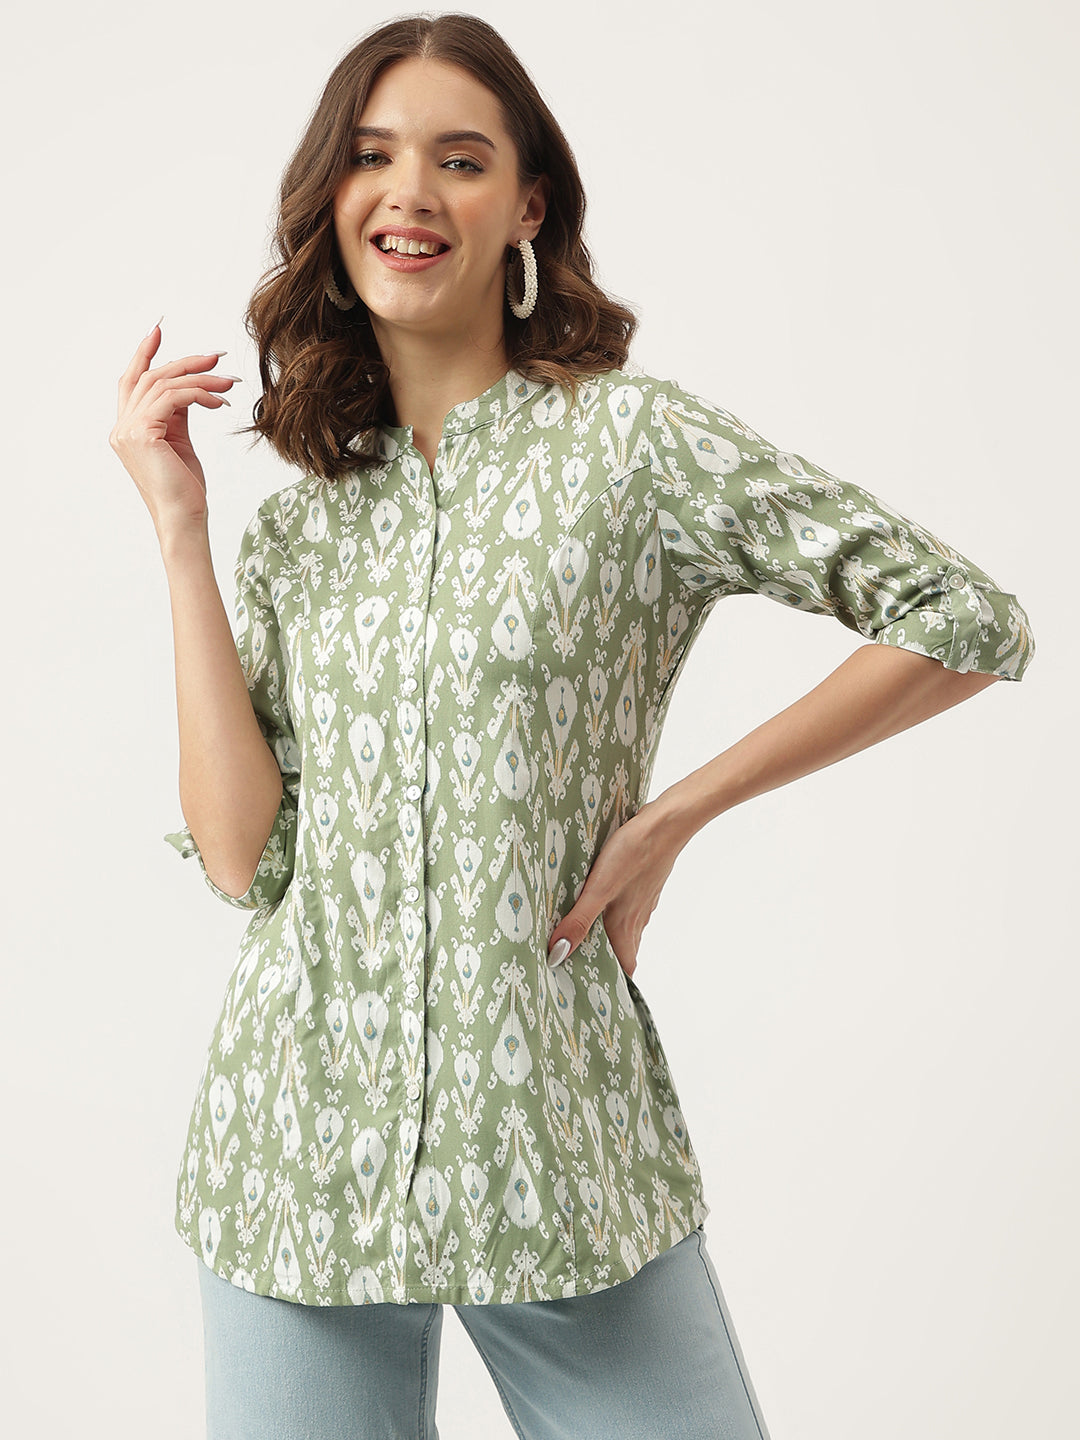 Divena Green & White Floral Foil Printed Rayon Shirt Style Top